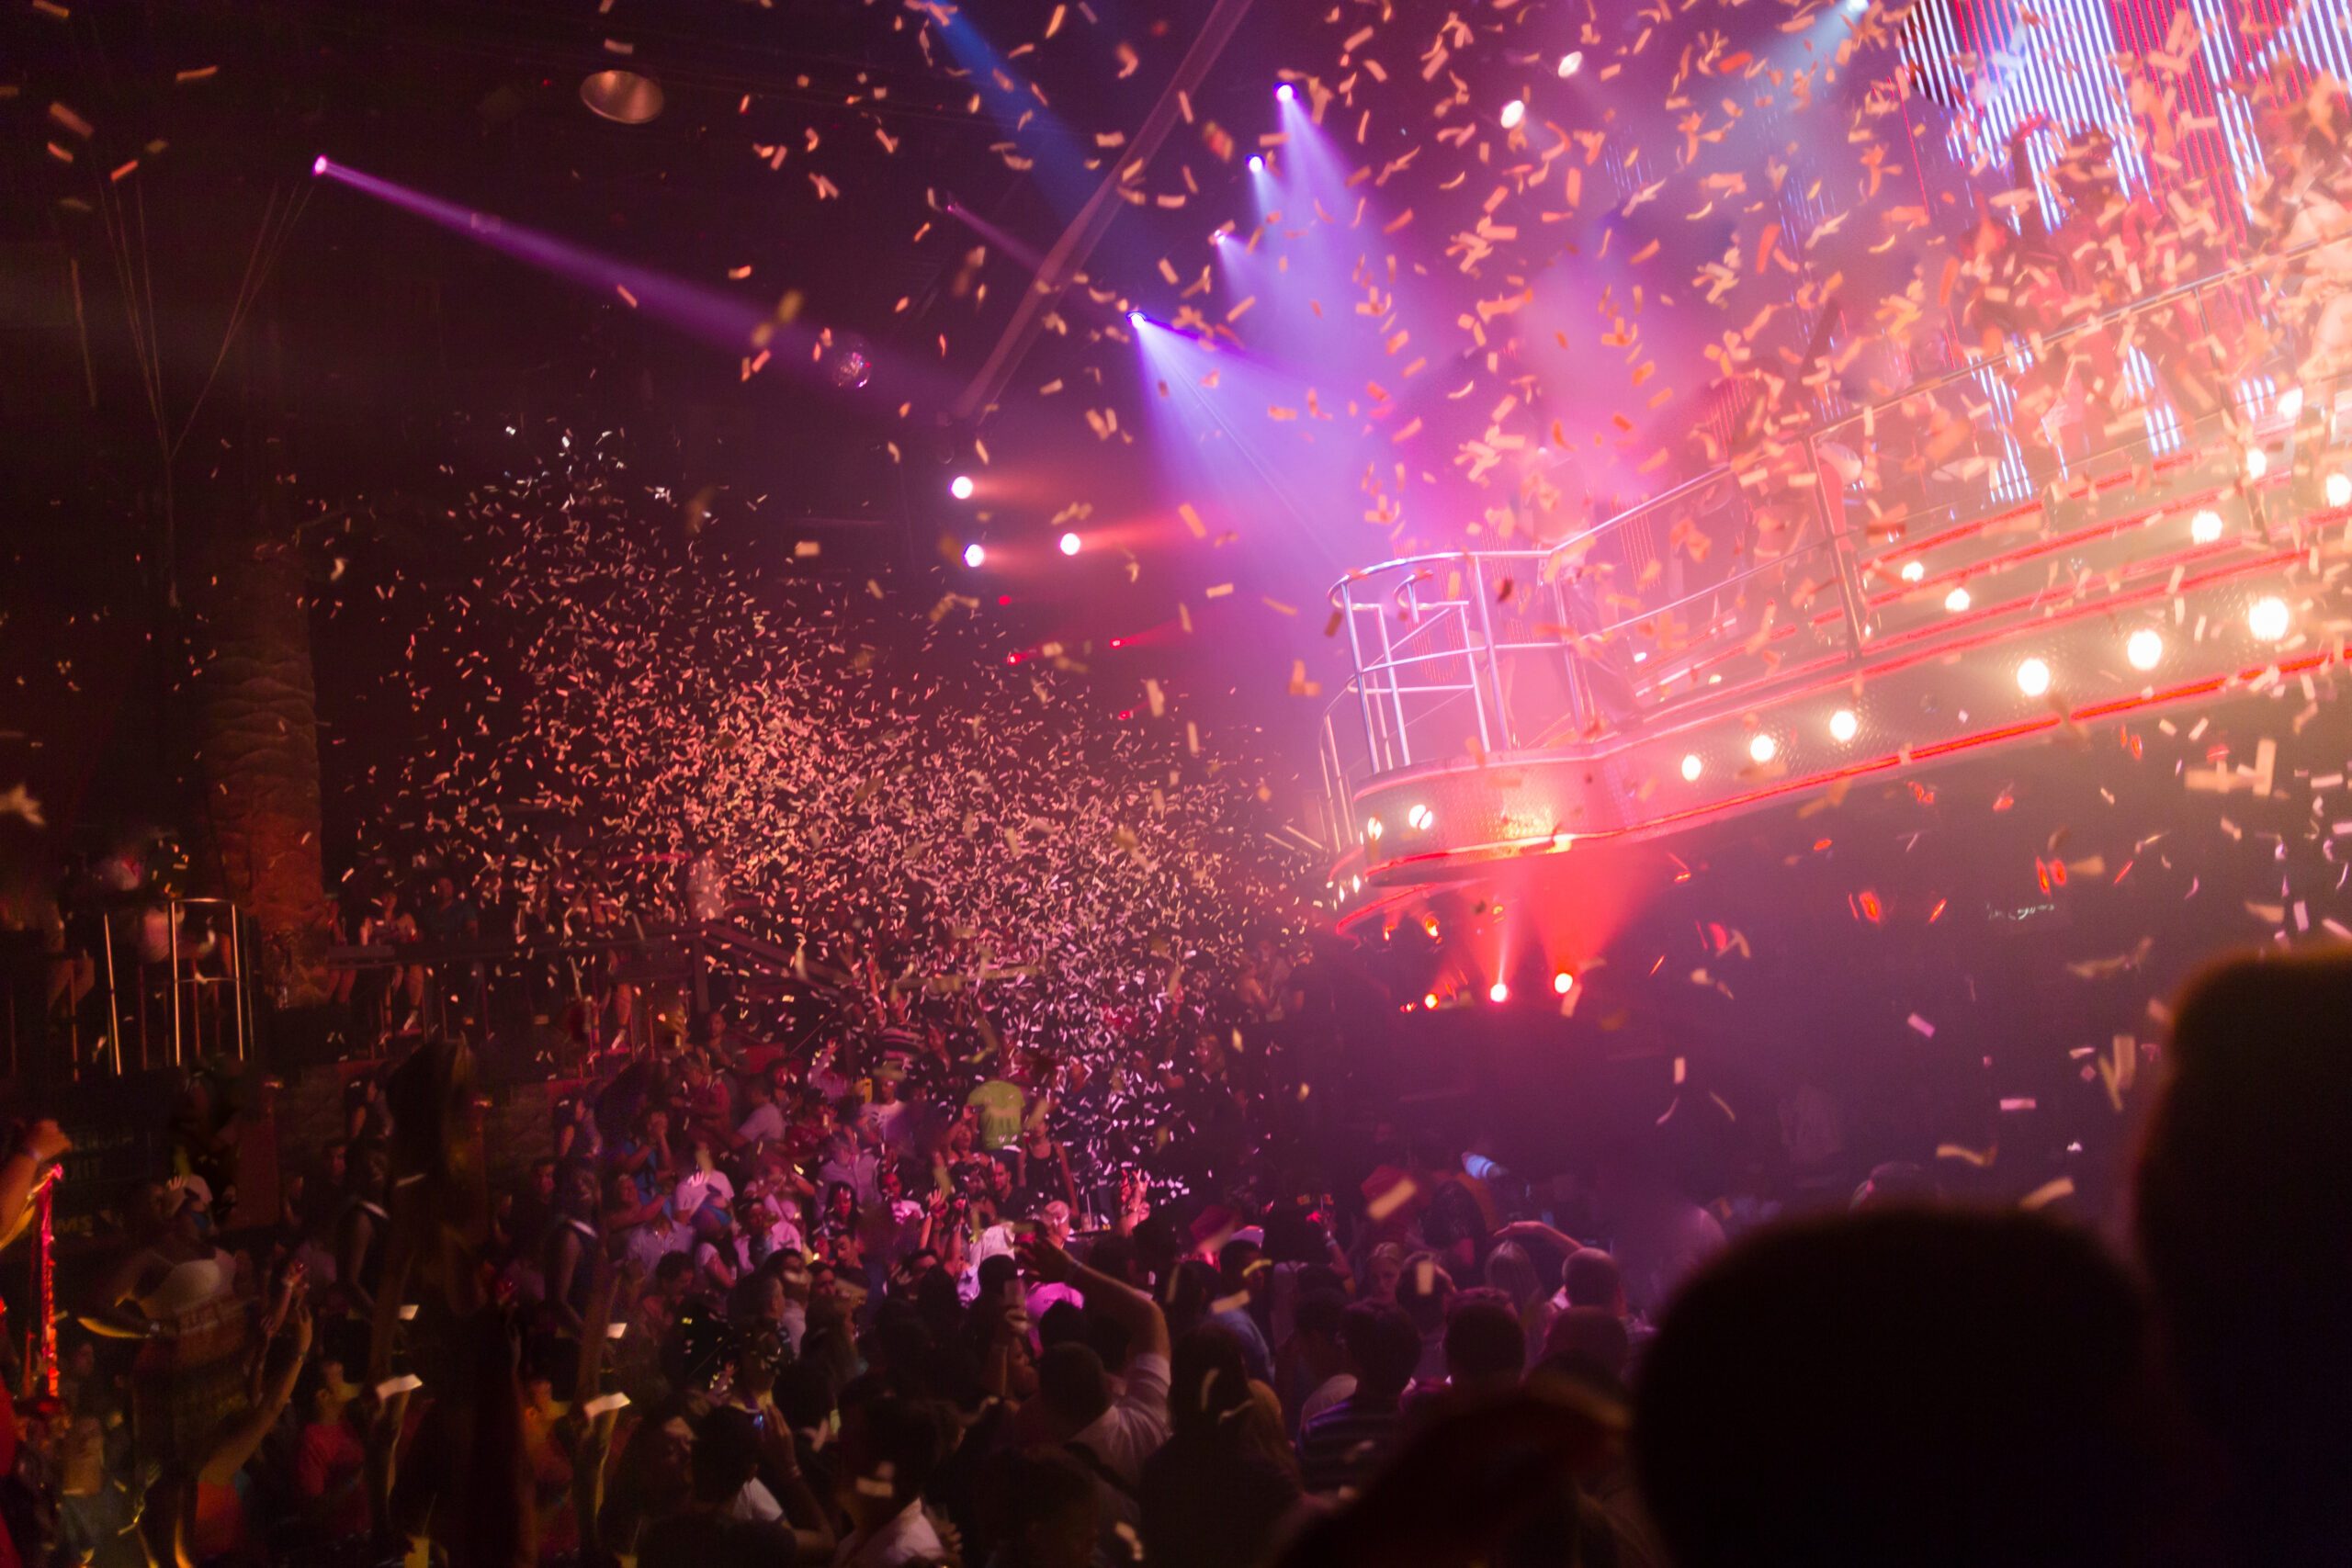 Punta Cana Explosive confetti at an entertainment party concert